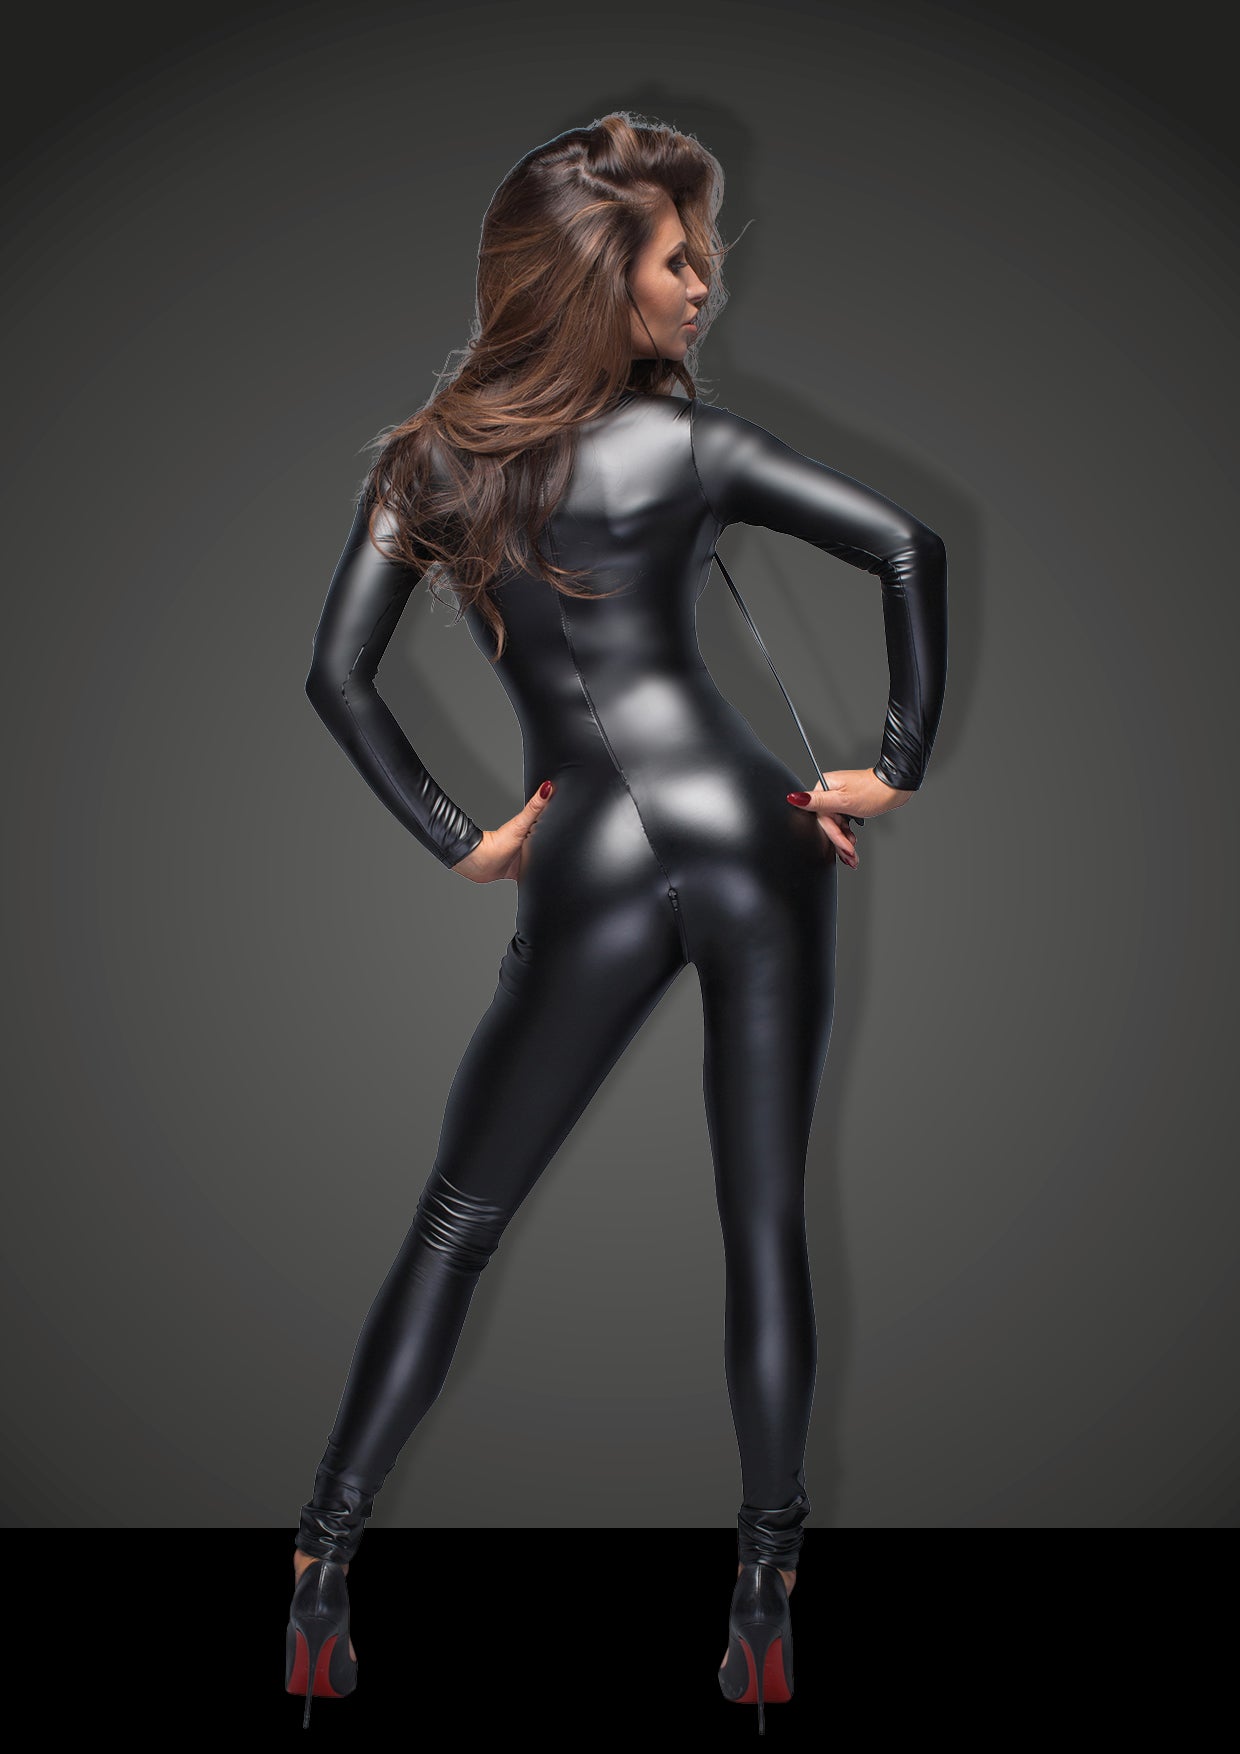 modell wearing black Catsuit with leash back view